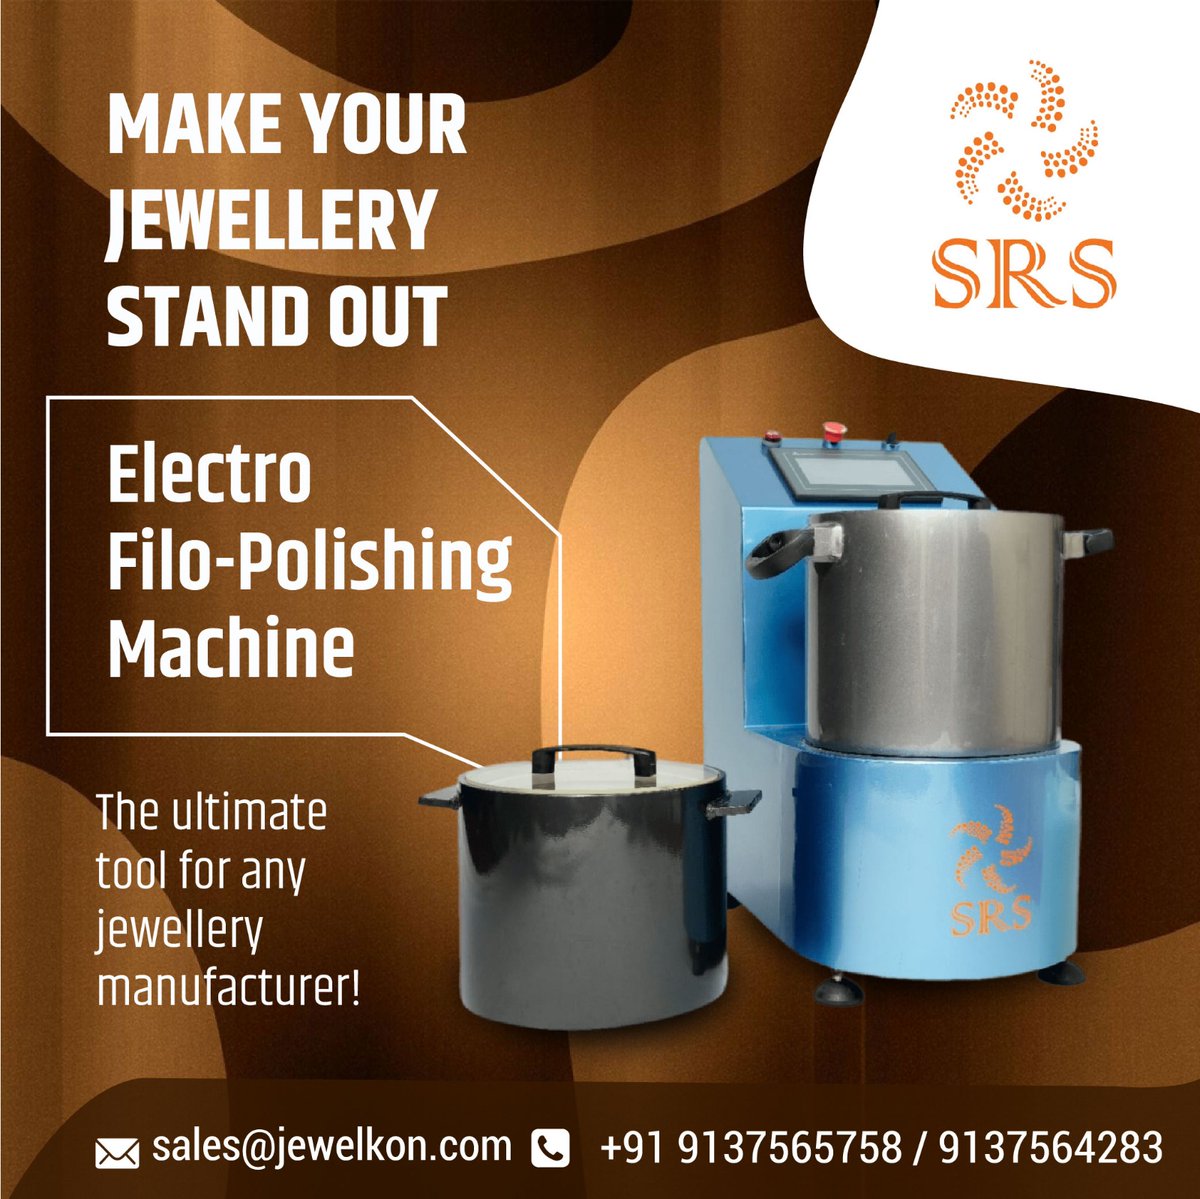 Make your jewellery stand out
support@jewelkon.com
Call - +91 9137565758 / +91 9137564283
#jewellery #accessories #finejewelry #jewelrymaking #alloys #alloy #machine #polishing #detailing #indianjewellery #jewellerylover  #fashionjewelry #traditionaljewellery #jewel #necklaces